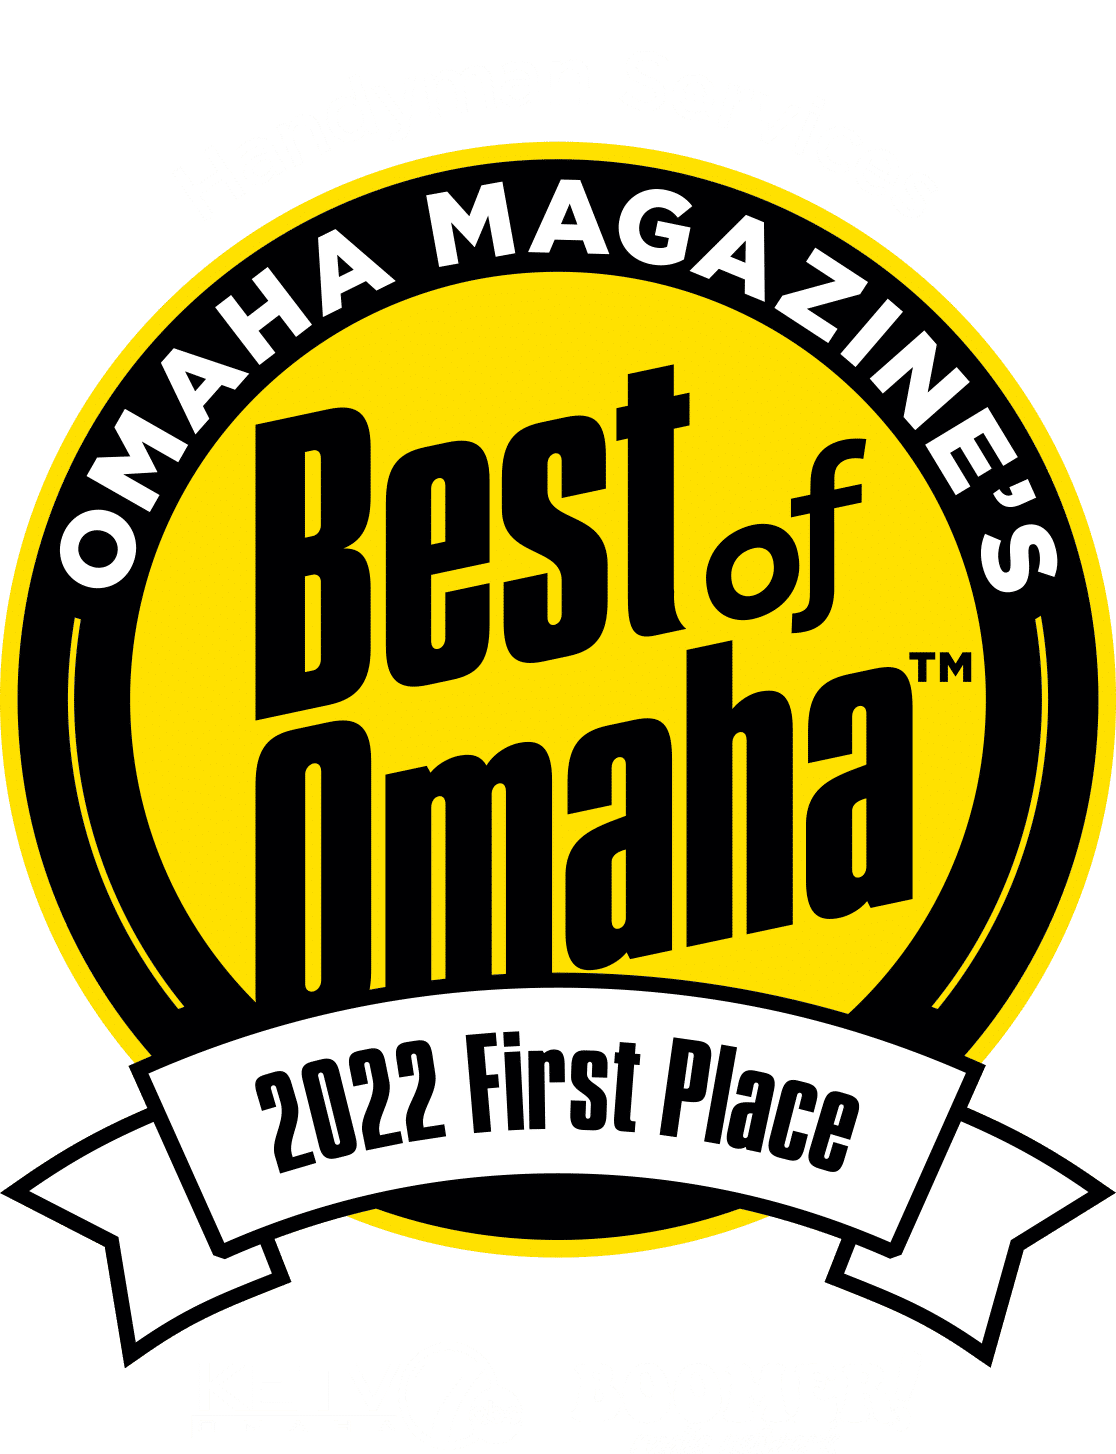 First Place - 2022 Best of Omaha - Omaha Handyman Service